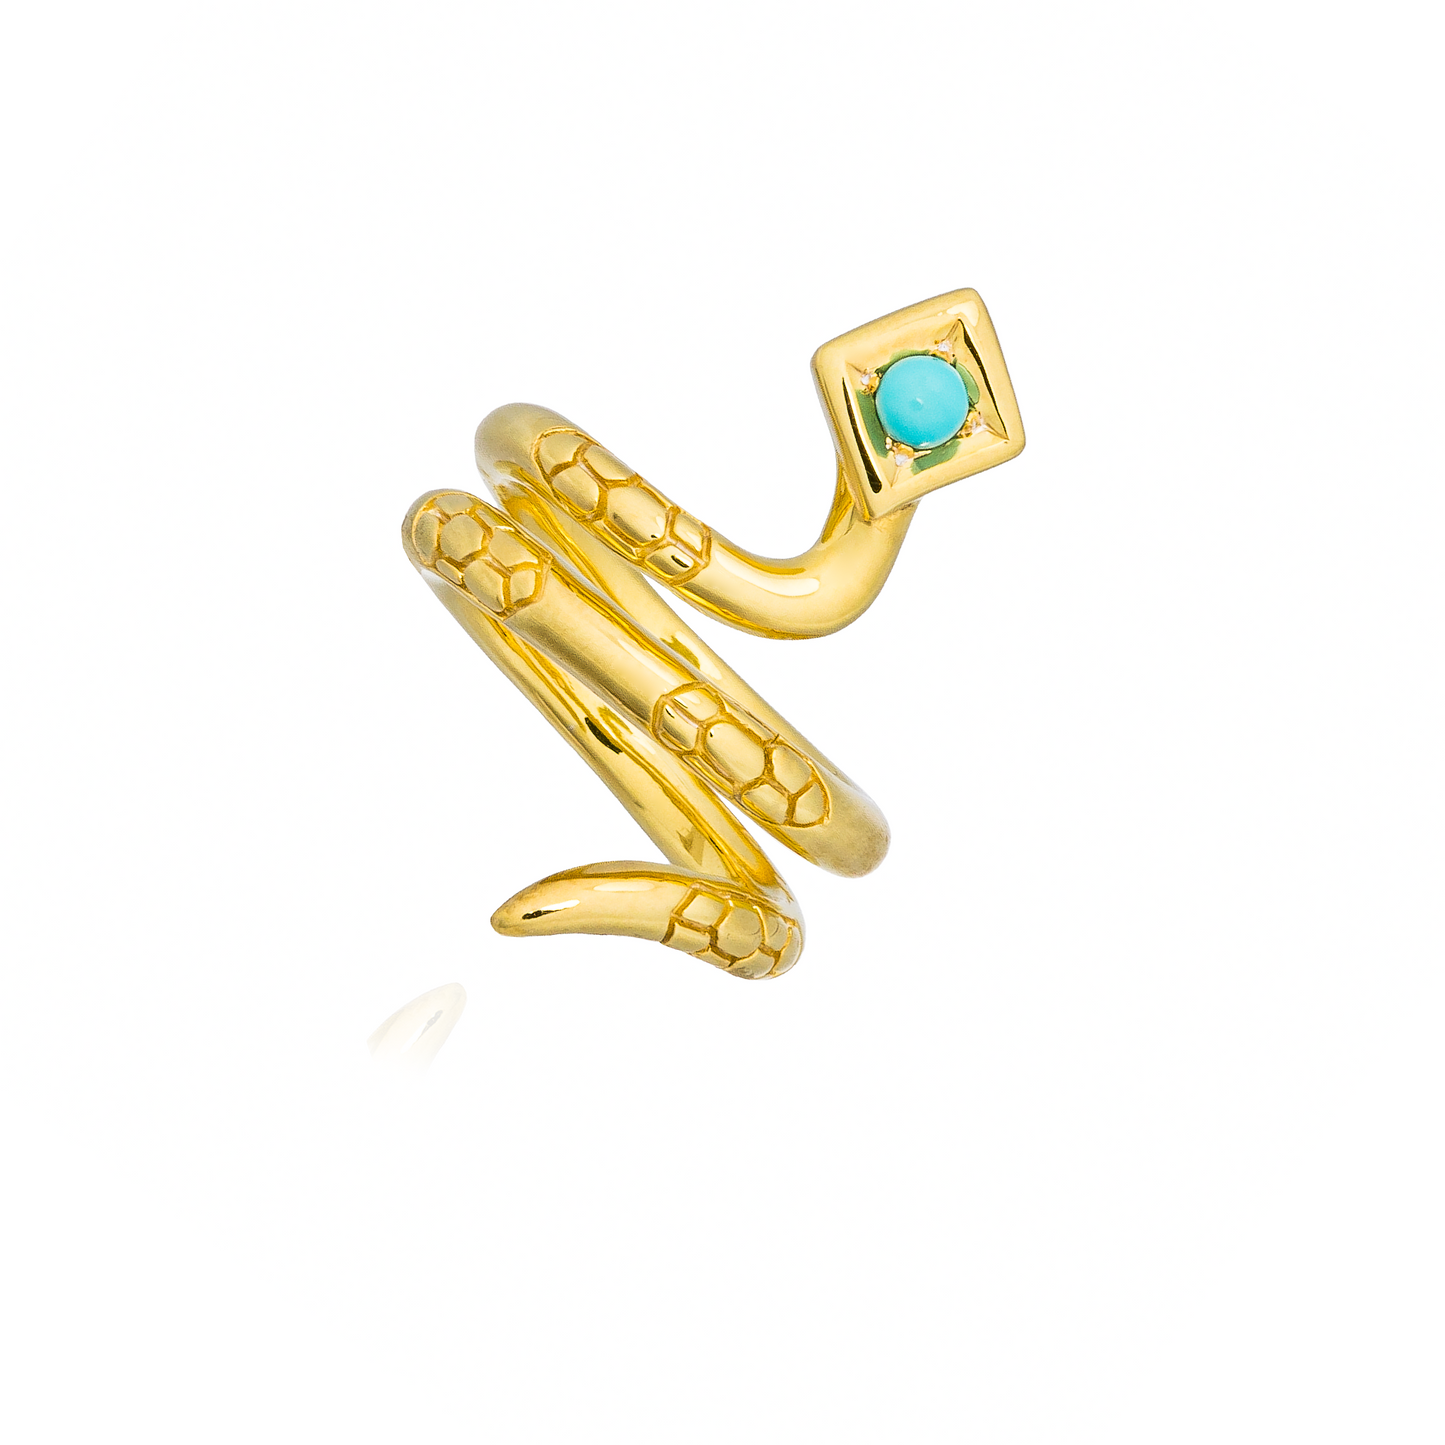 Serpentine 925 Silver Snake Ring with Turquoise Cabouchon